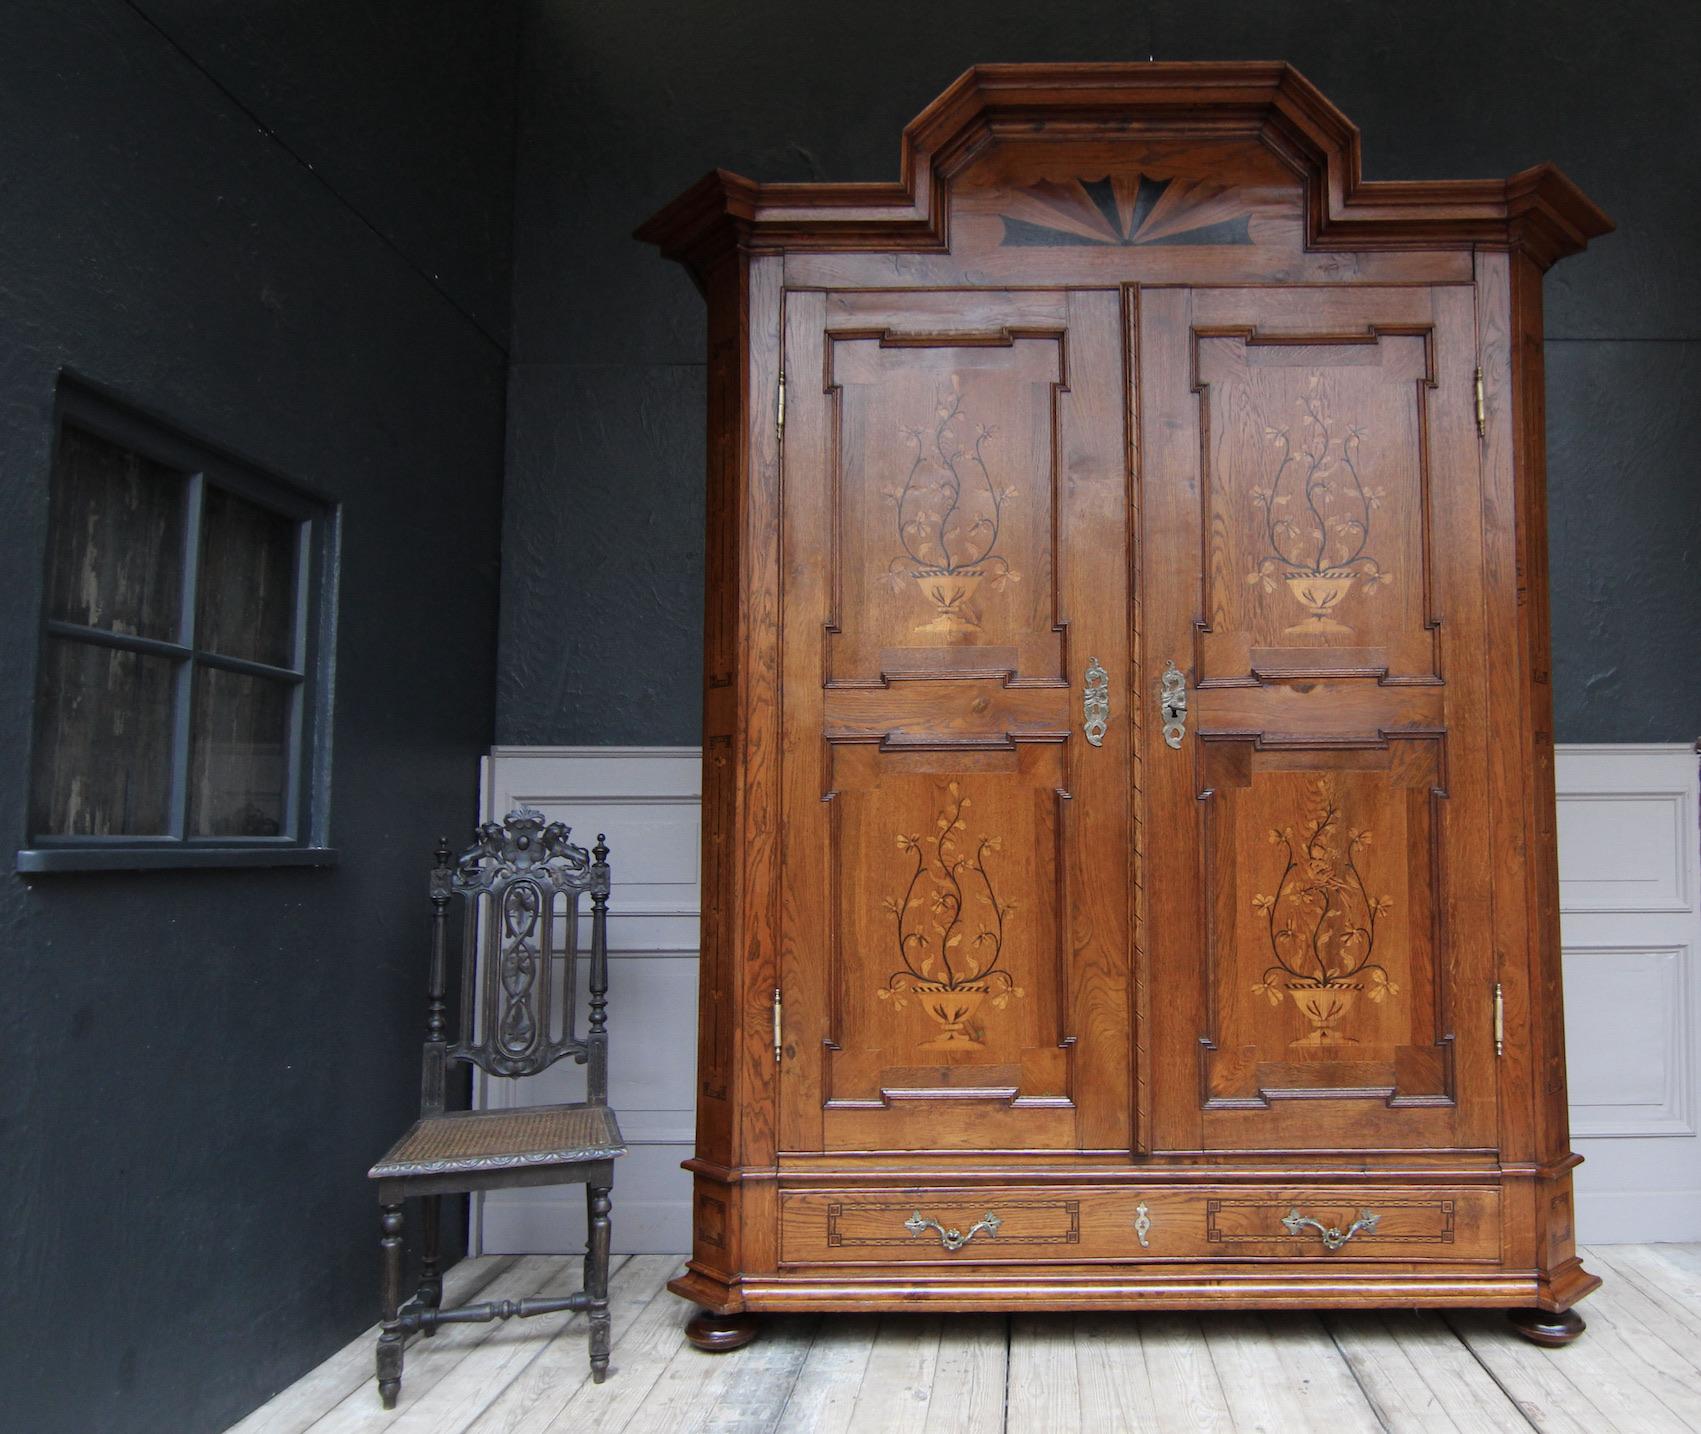 Large representative hall cupboard from the 19th century. Probably from Hesse. Solidly made of oak with inlays of maple, walnut and other precious woods.

Two-door corpus with bevelled corners standing on four squashed ball feet, base level with